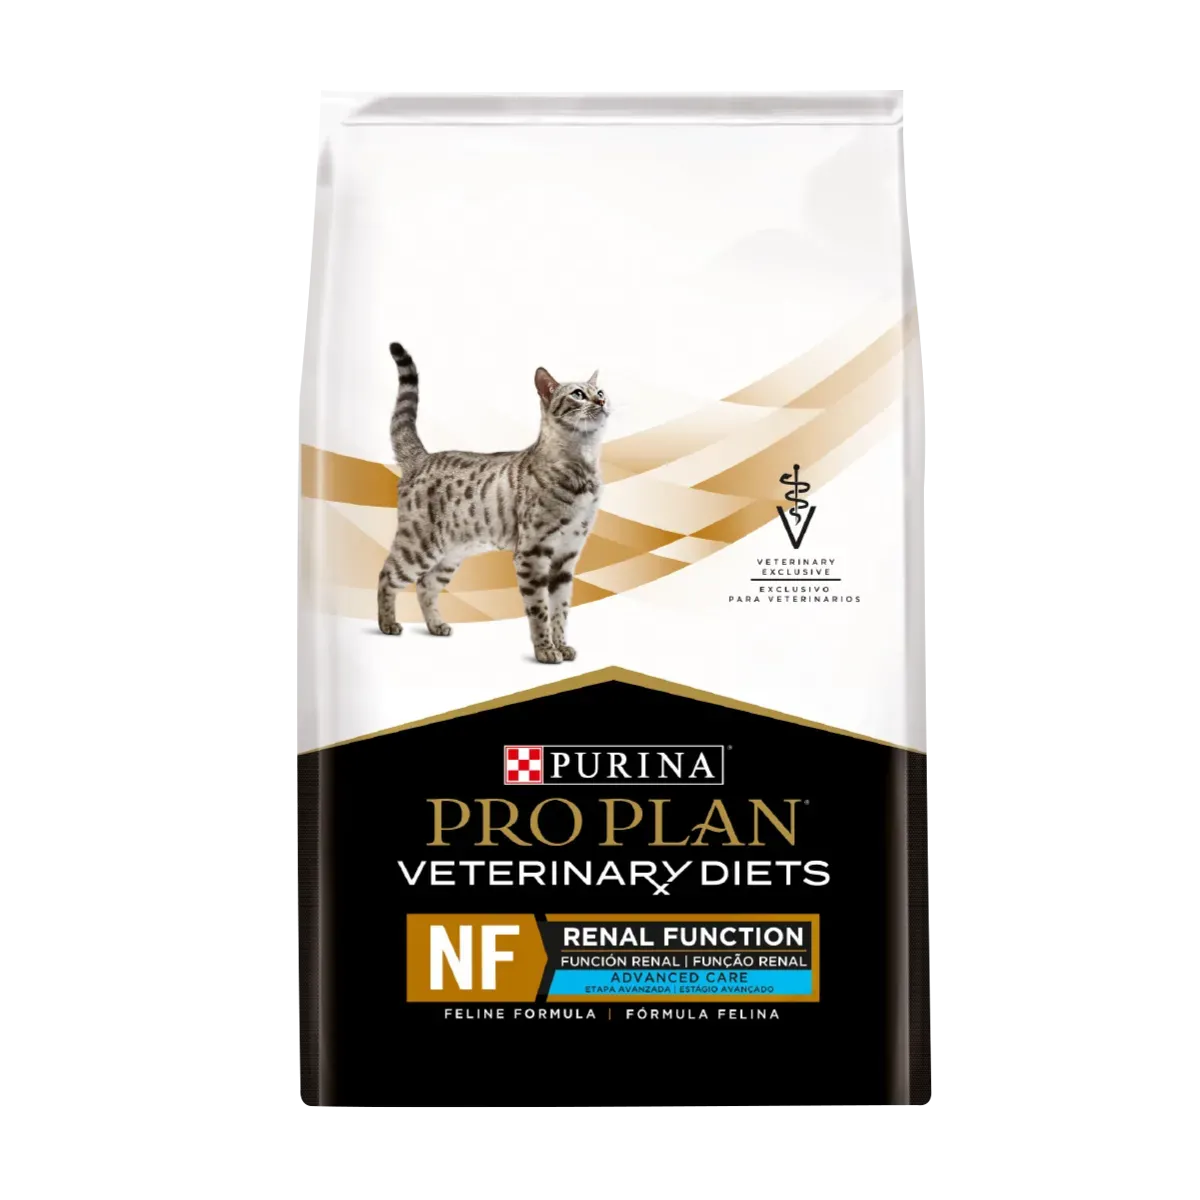 purina-pro-plan-veterinay-diets-cat-nf-renal-function-advanced-care.webp